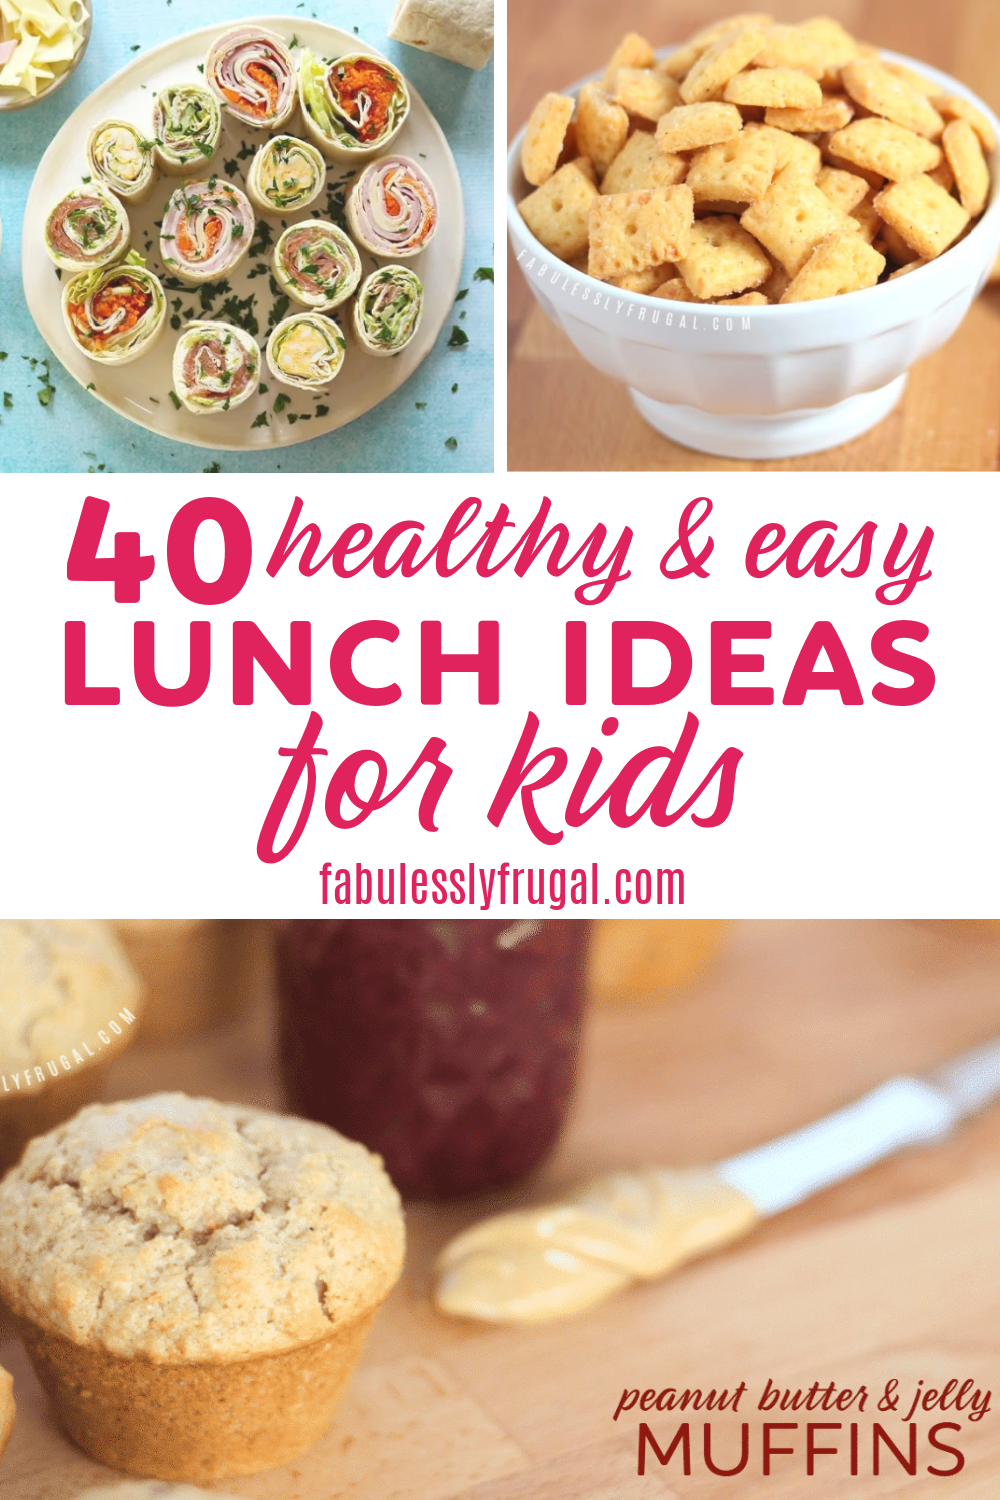 https://fabulesslyfrugal.com/wp-content/uploads/2022/09/healthy-and-easy-cold-lunch-ideas-for-kids-.png